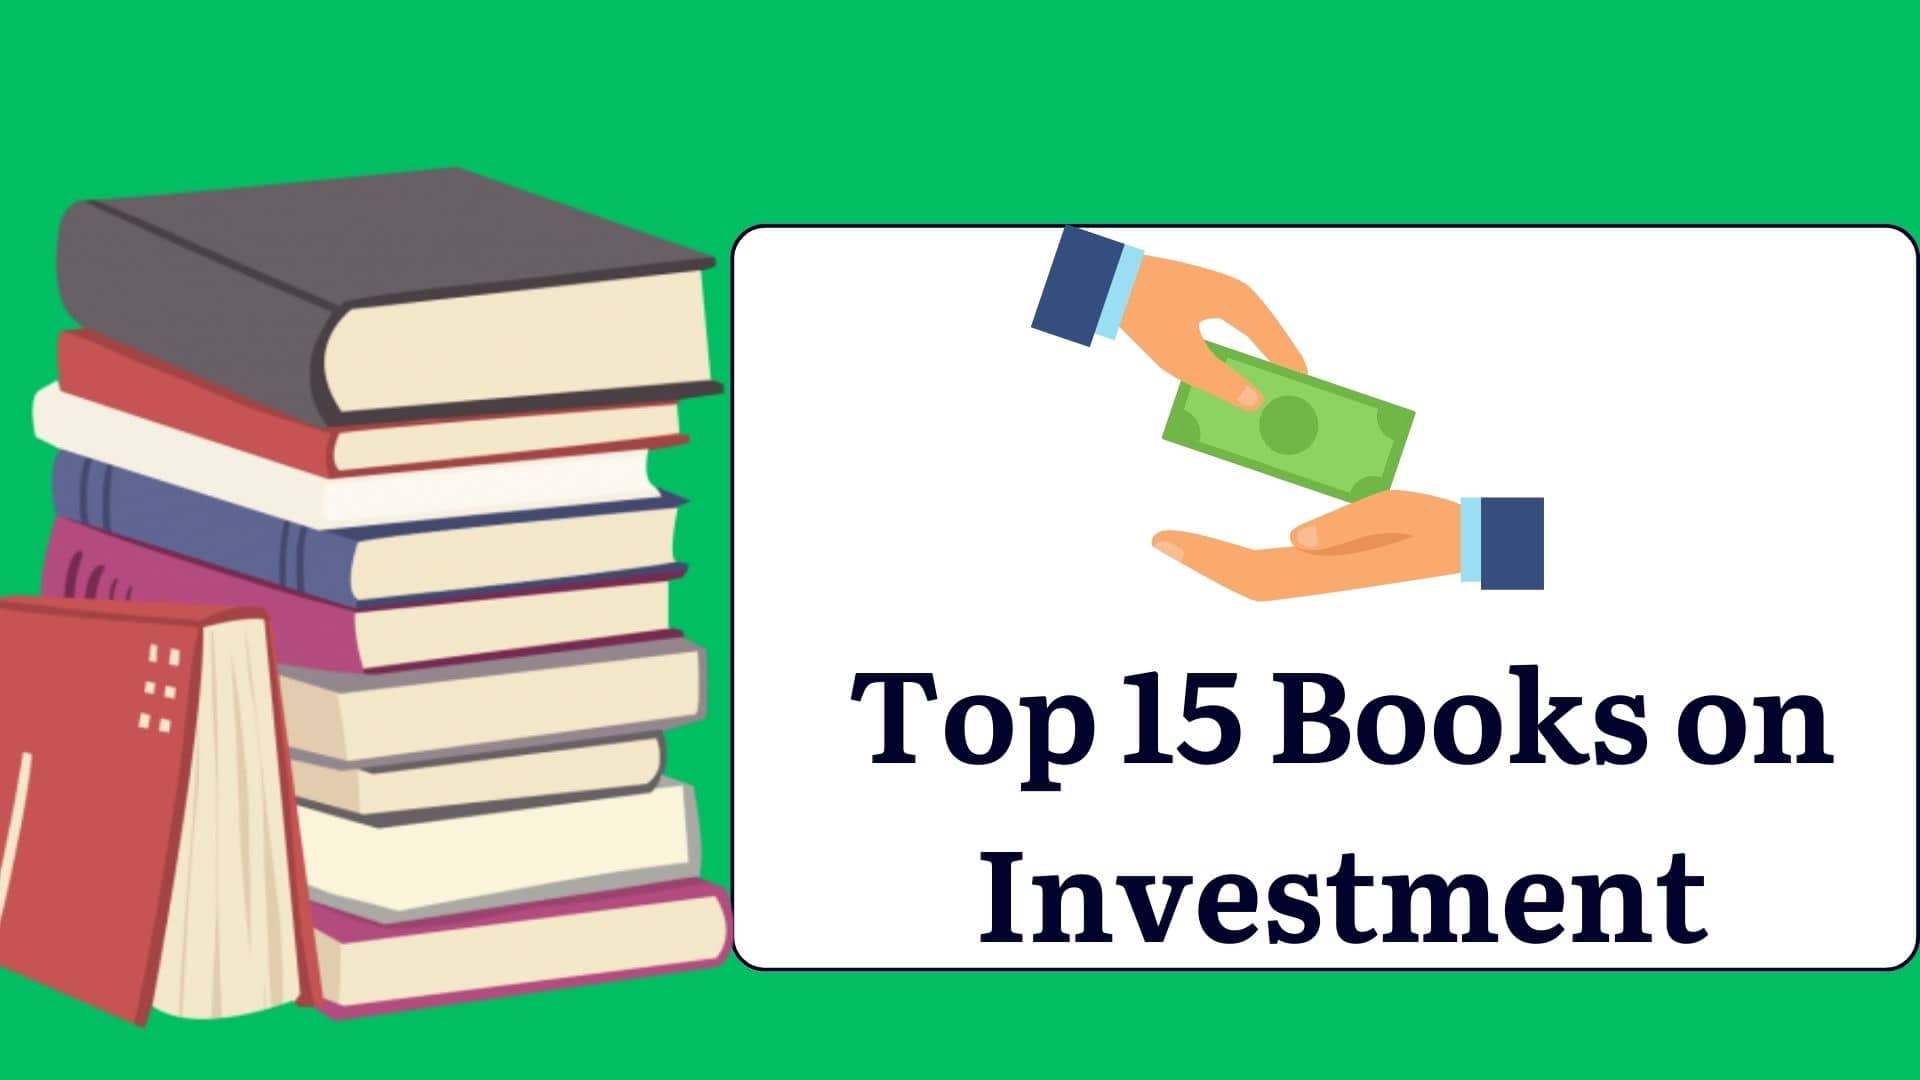 Top 15 Books on Investment